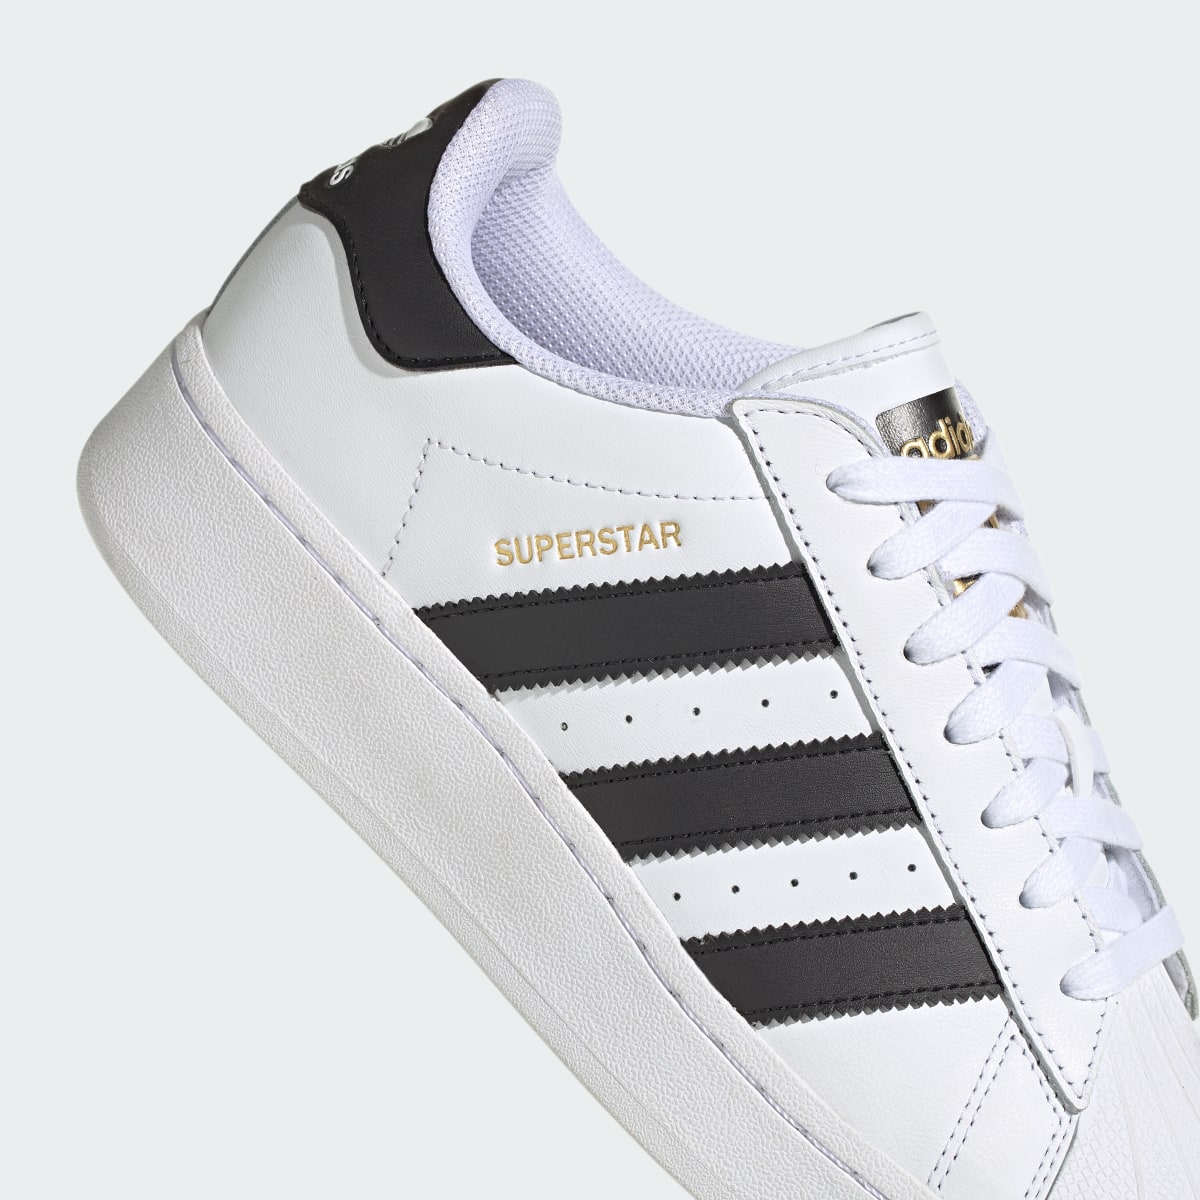 Adidas Superstar XLG Shoes. 11